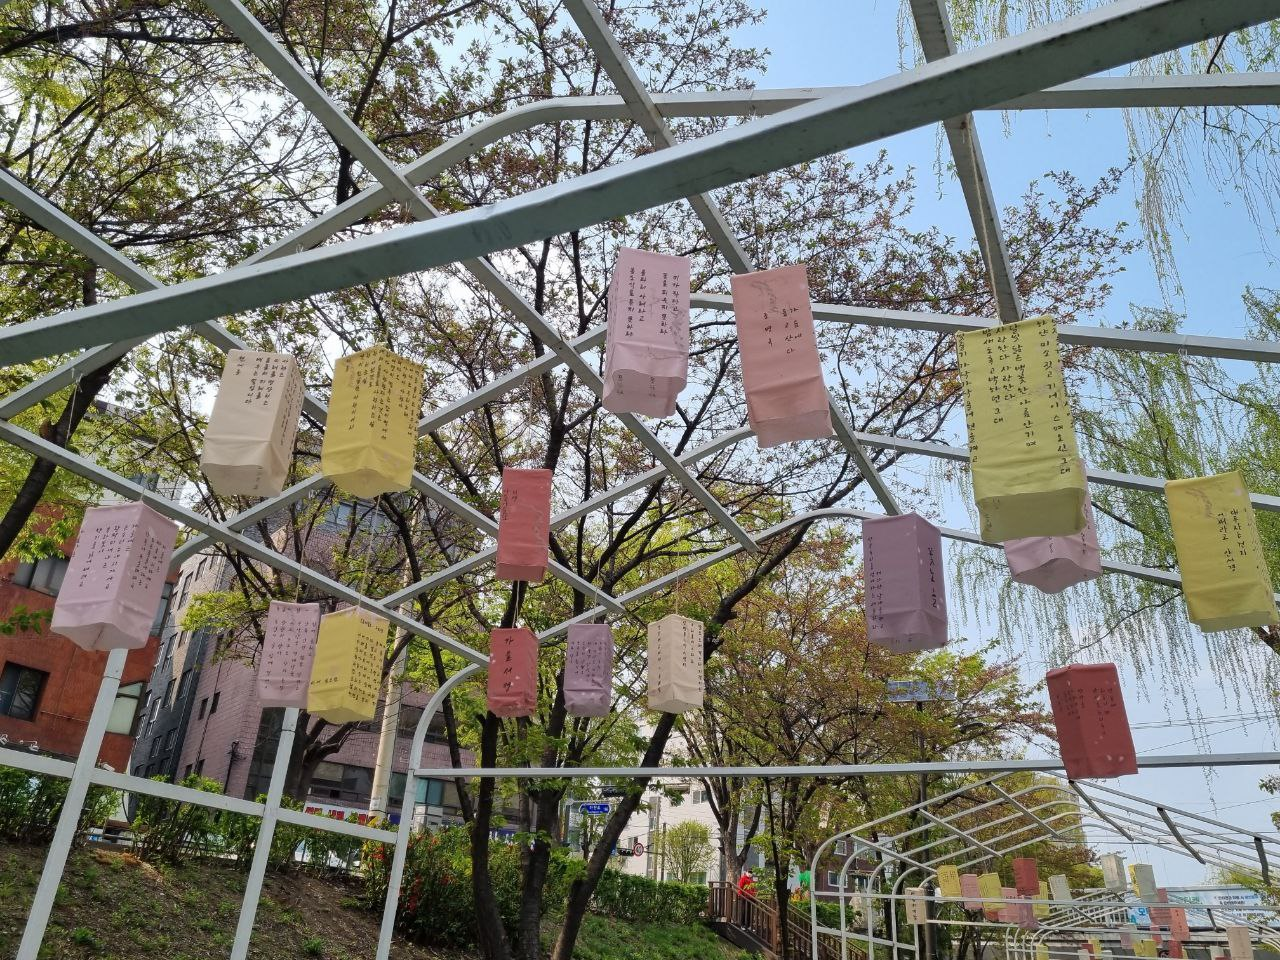 Lanterns with wishes